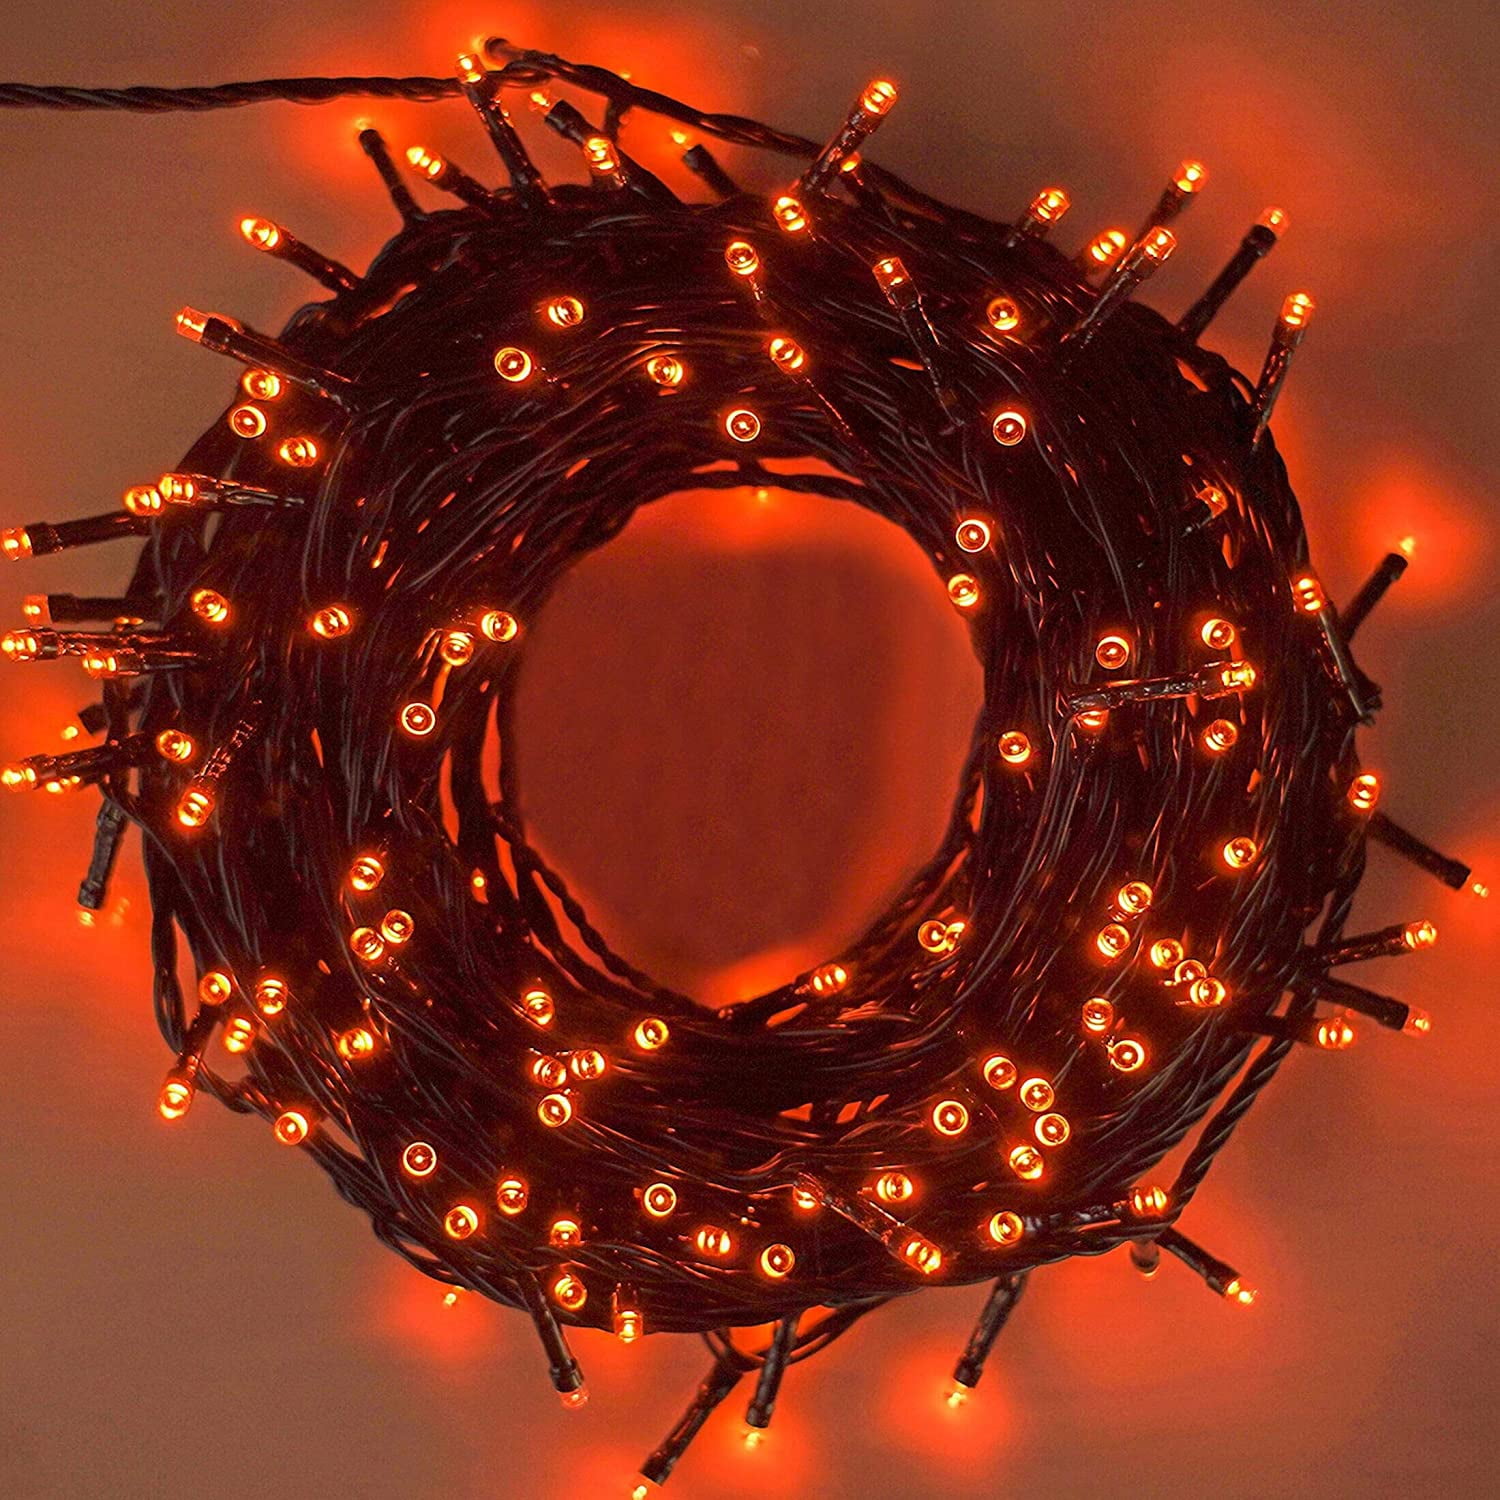 Outdoor Indoor LED Christmas Fairy String Lights Halloween Party Decor with Plug